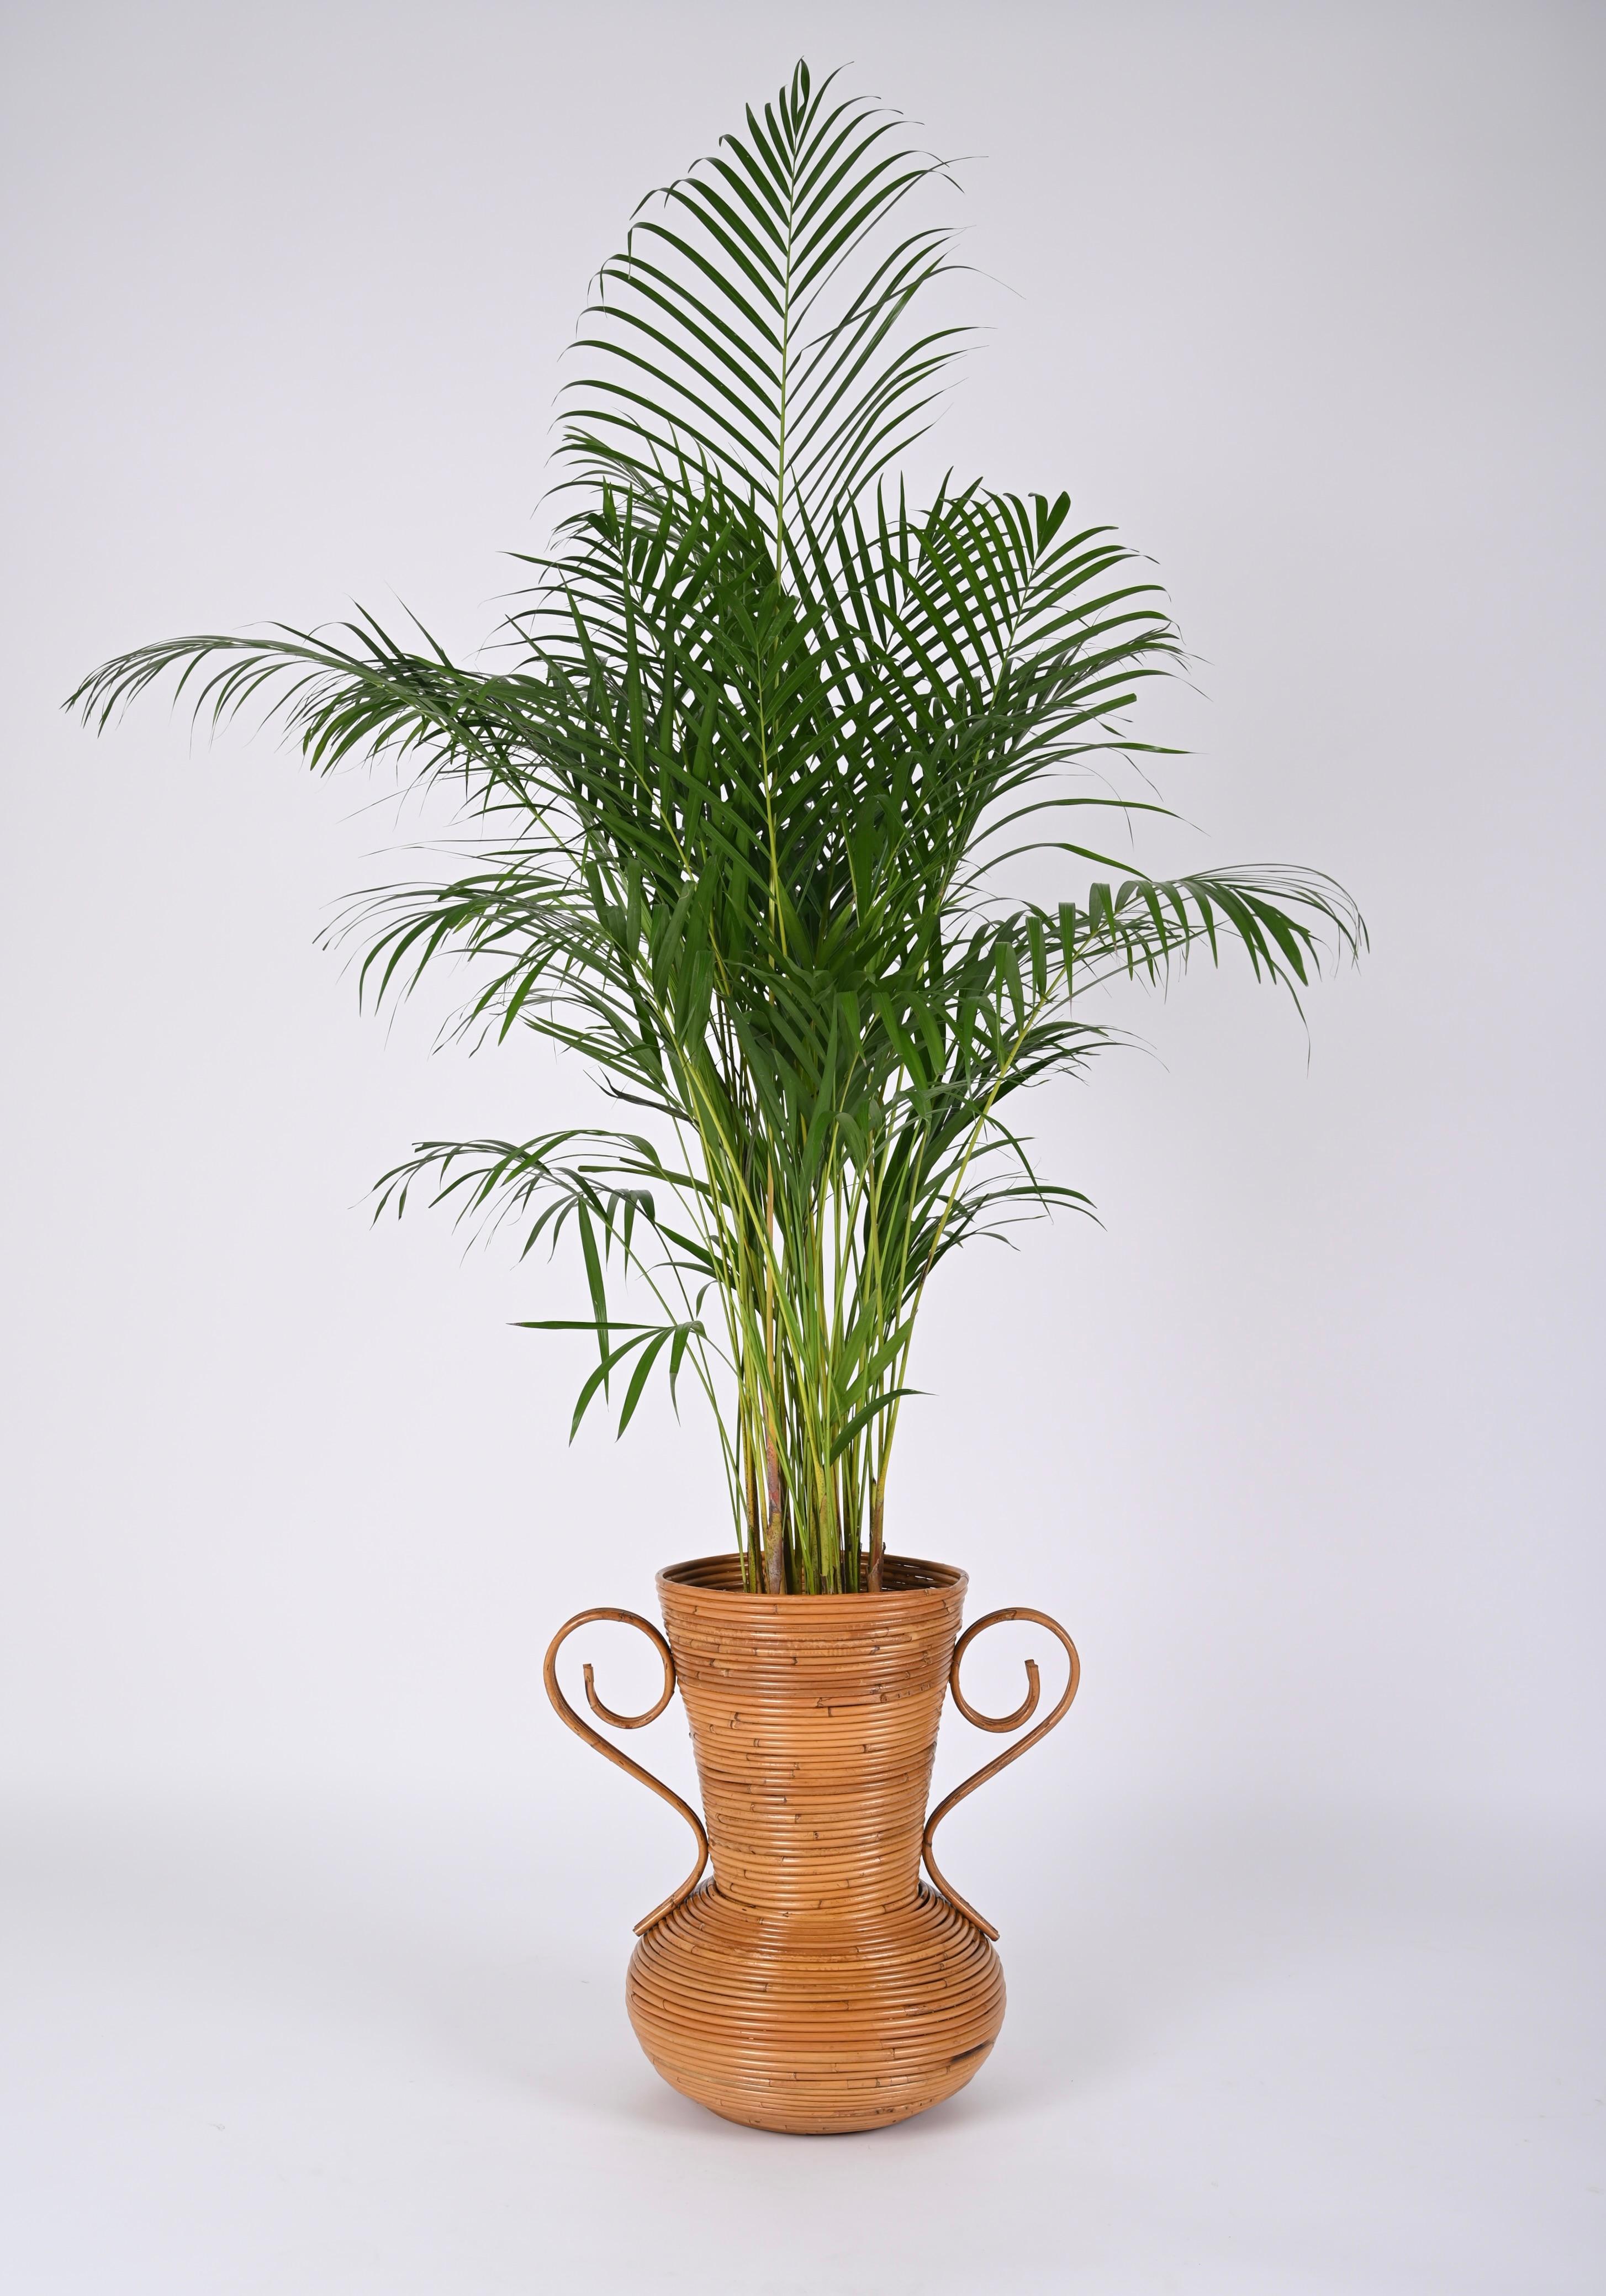 Gorgeous midcentury bamboo and rattan decorative vase. This beautiful piece was produced by Vivai del Sud in Italy during 1970s.

This large amphora vase that could be also used as stick holder is fully made in curved rattan with perfect